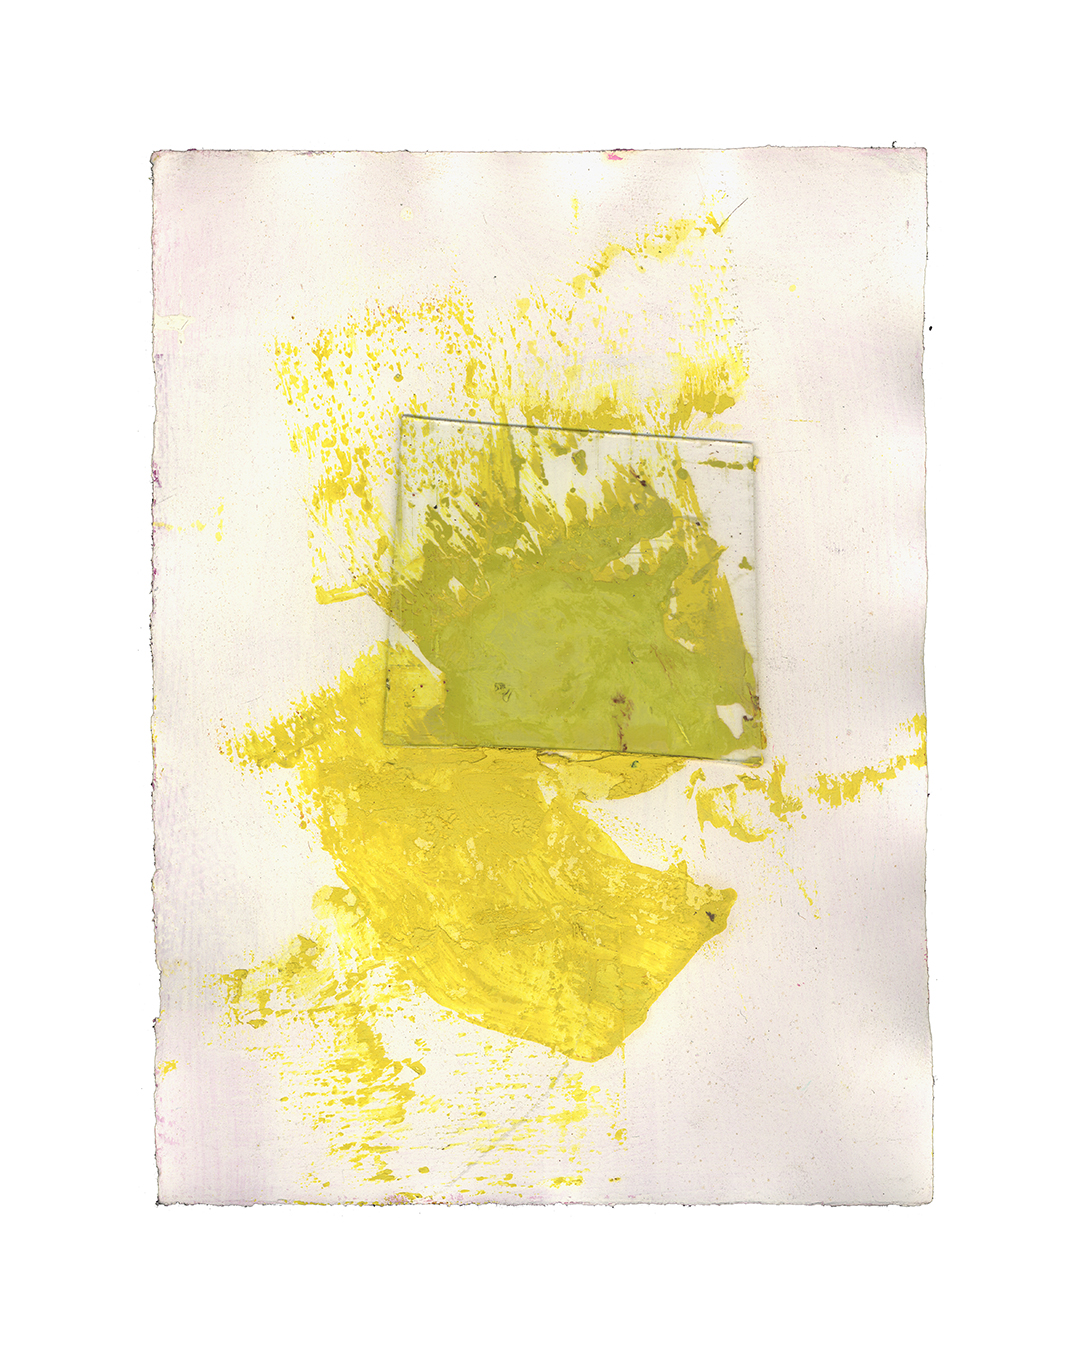 Piet Dieleman, untitled, 2020, painting, glass, oil paint, acrylic paint on paper, 390 x 285 mm, €930